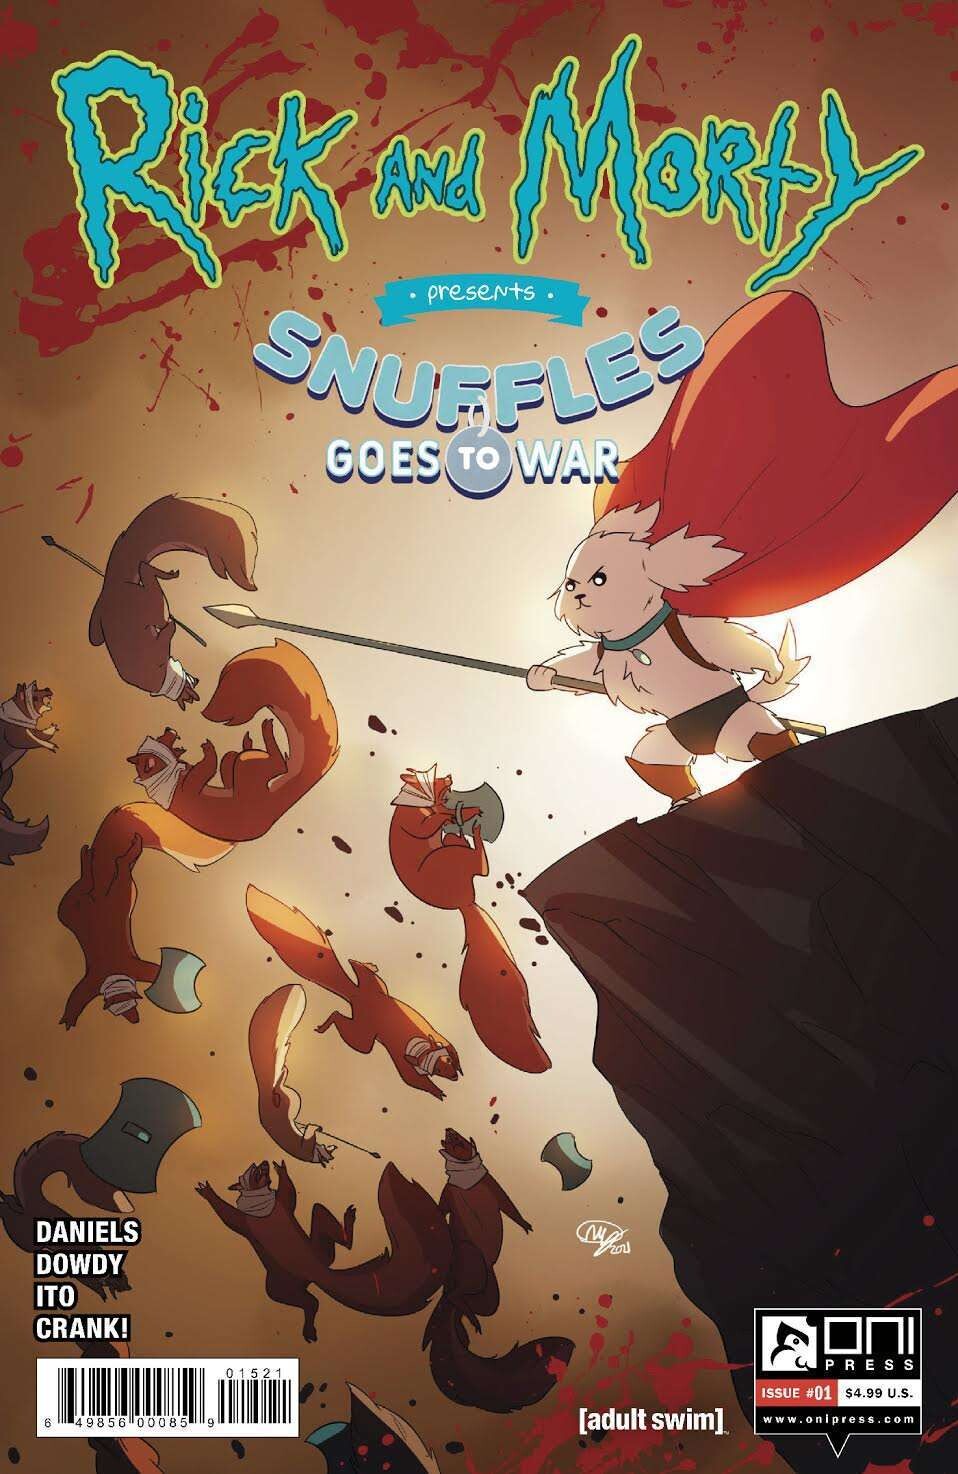 Rick and Morty: Snuffles goes to War #1 cover (official)